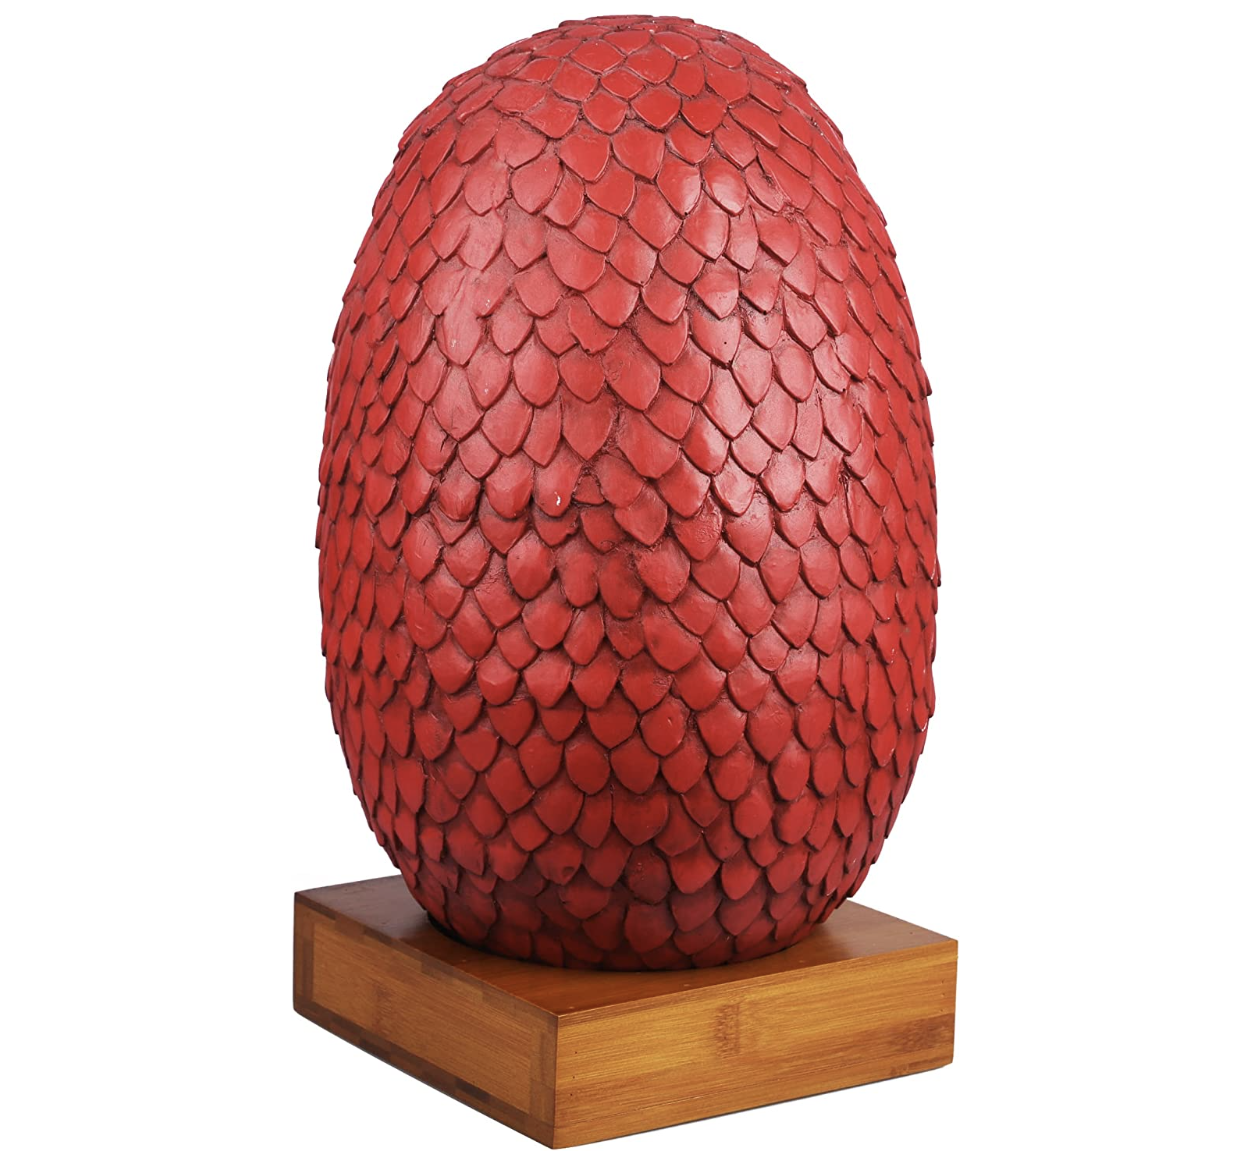 game-of-thrones-gifts-dragon-egg